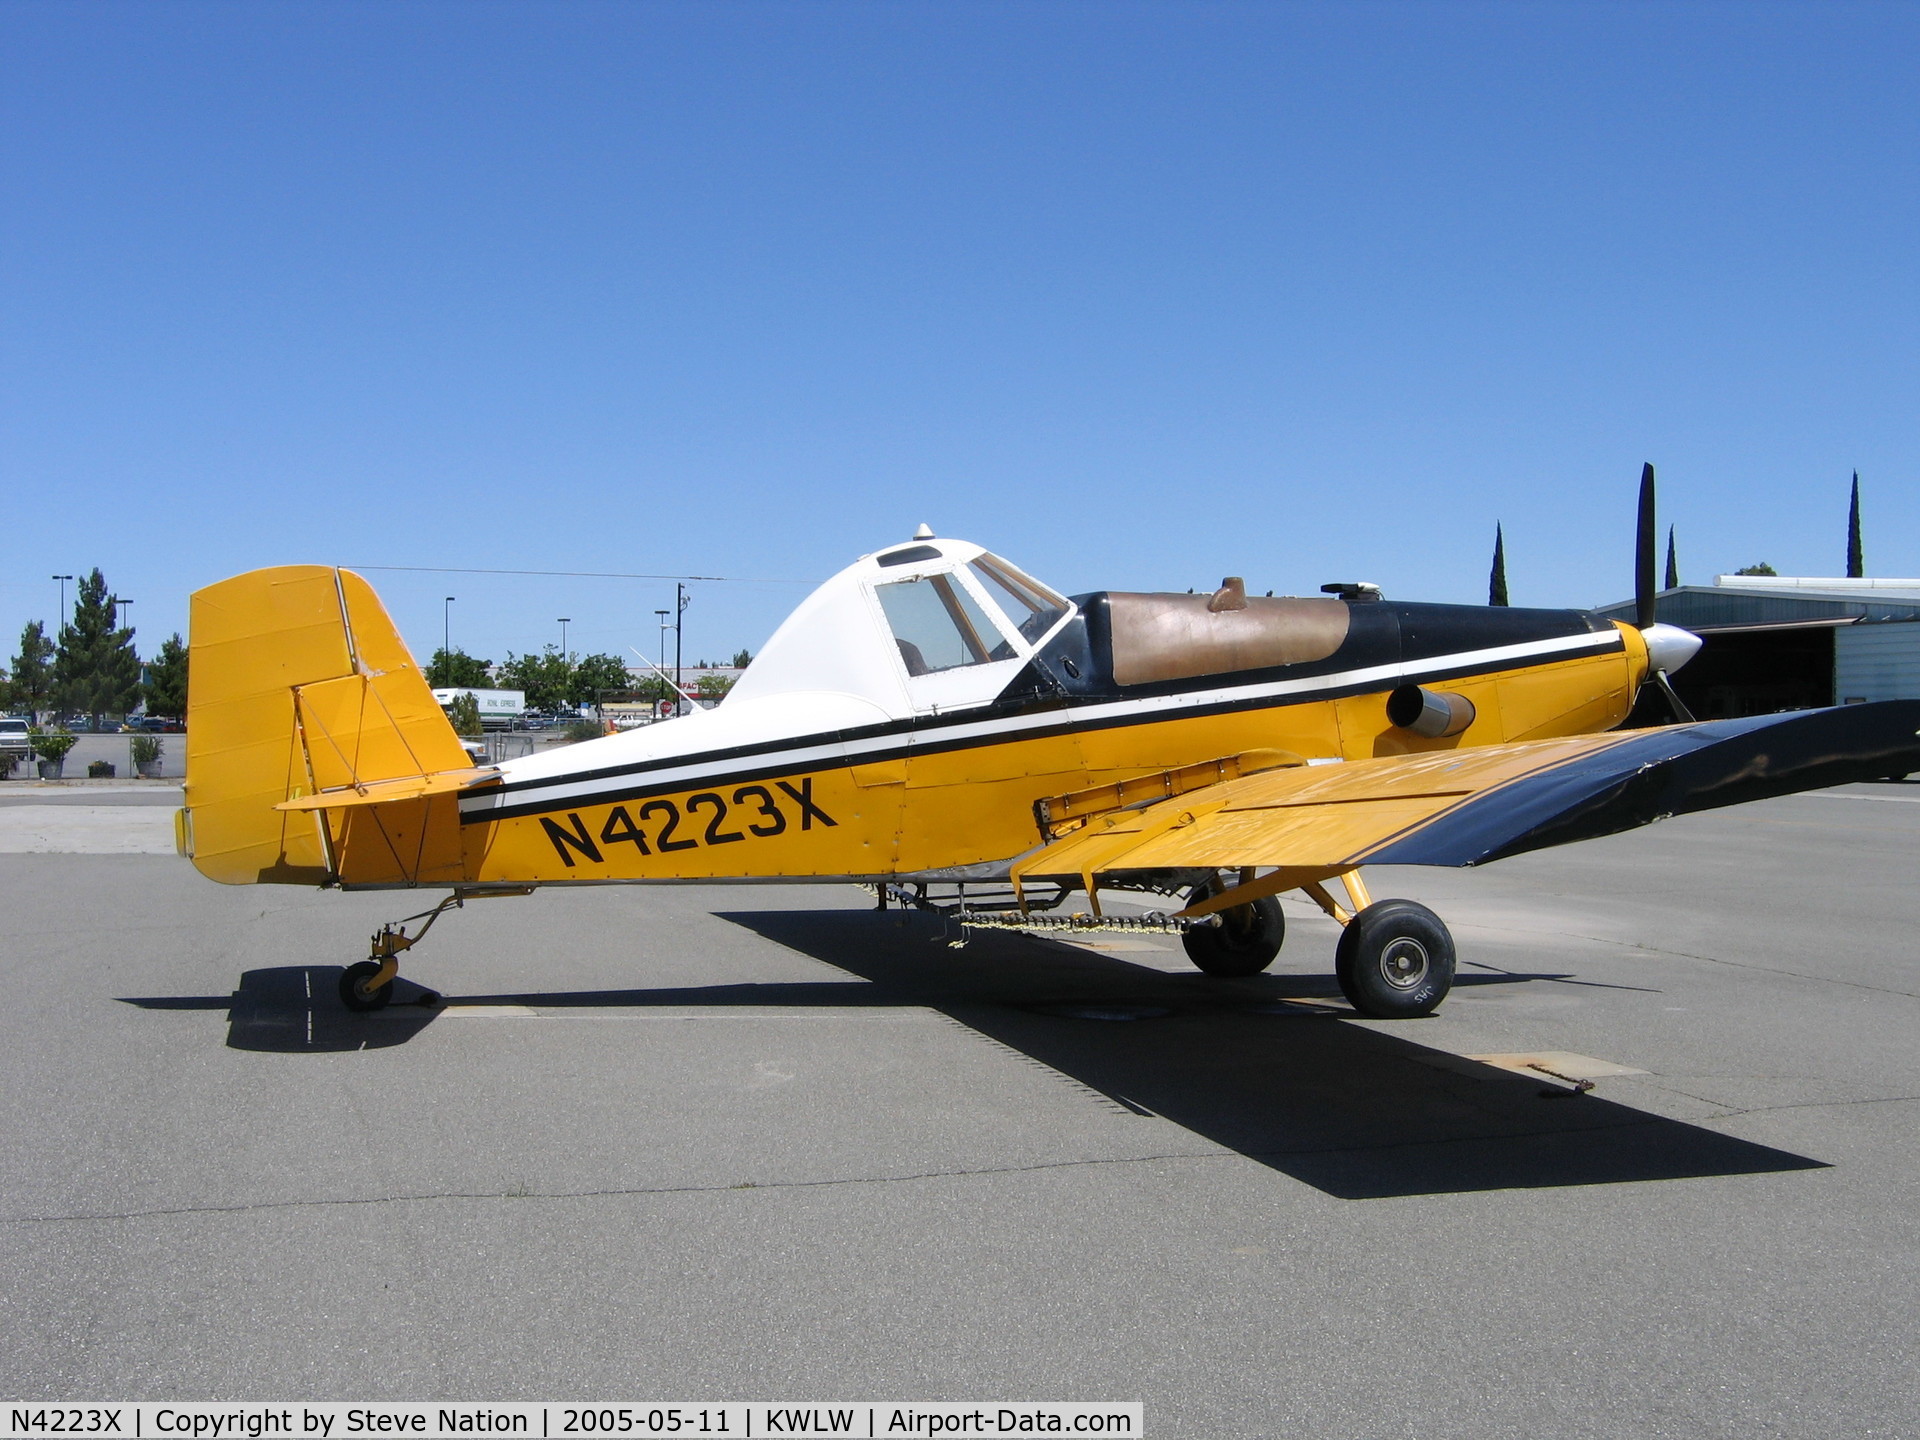 N4223X, 1974 Rockwell International S-2R Thrush Commander C/N 1984R, Mann and Sons 1974 Rockwell S2R-T34 conversion rigged for spraying @ Willows, CA